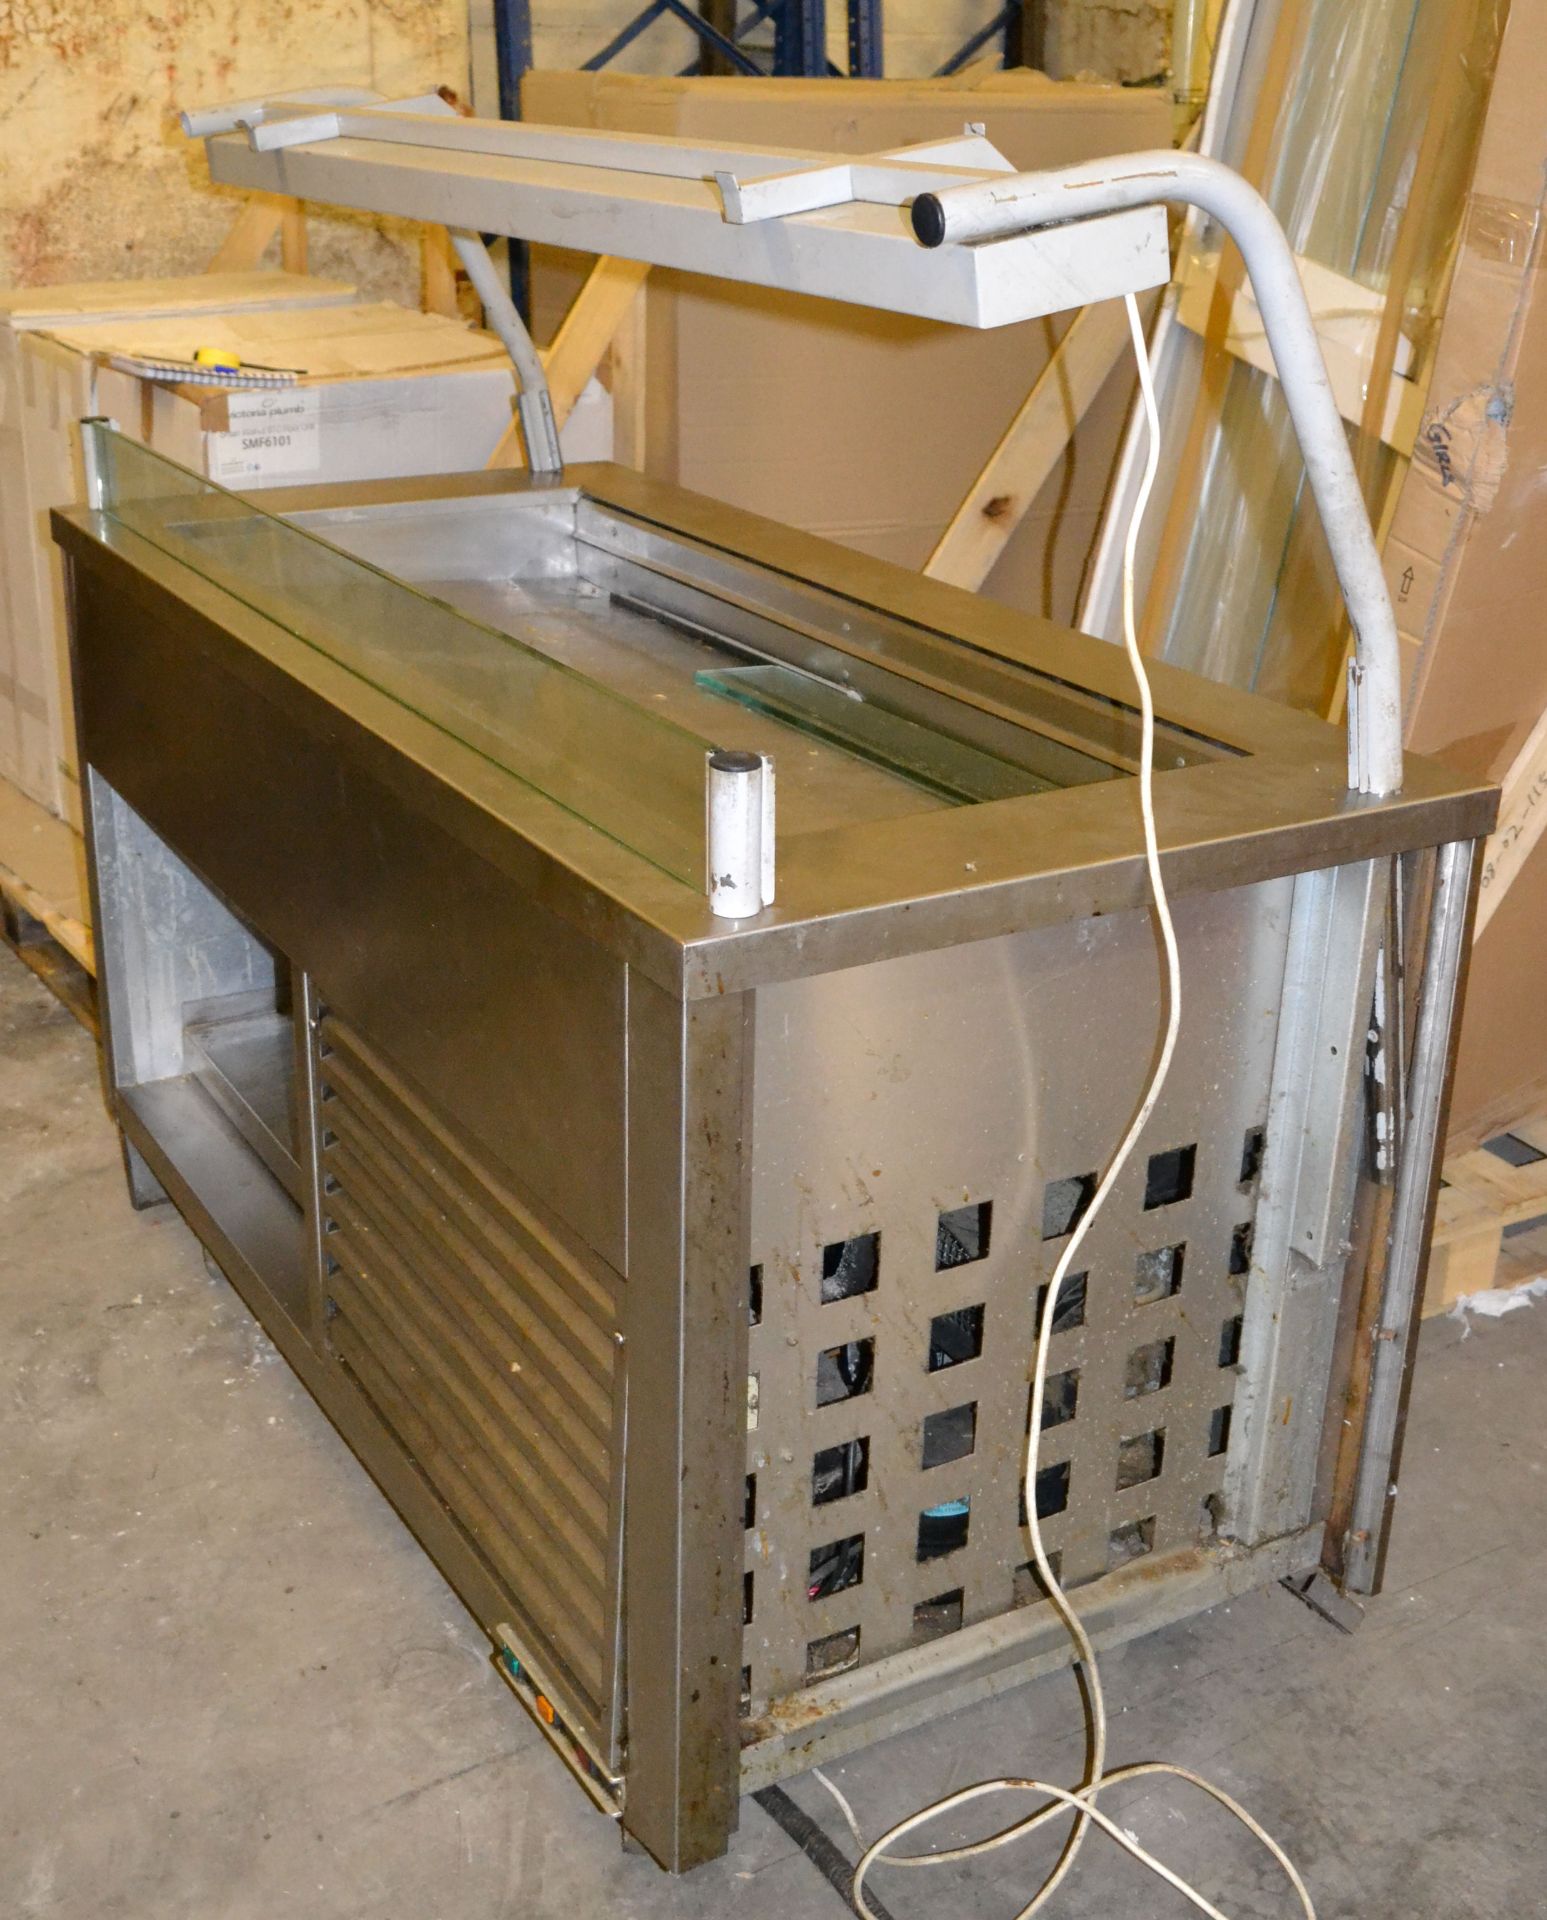 1 x Advanced Catering Equipment 1500BADW 240V Chilled Counter - Details to follow - Ref: FJC011 - - Image 8 of 10